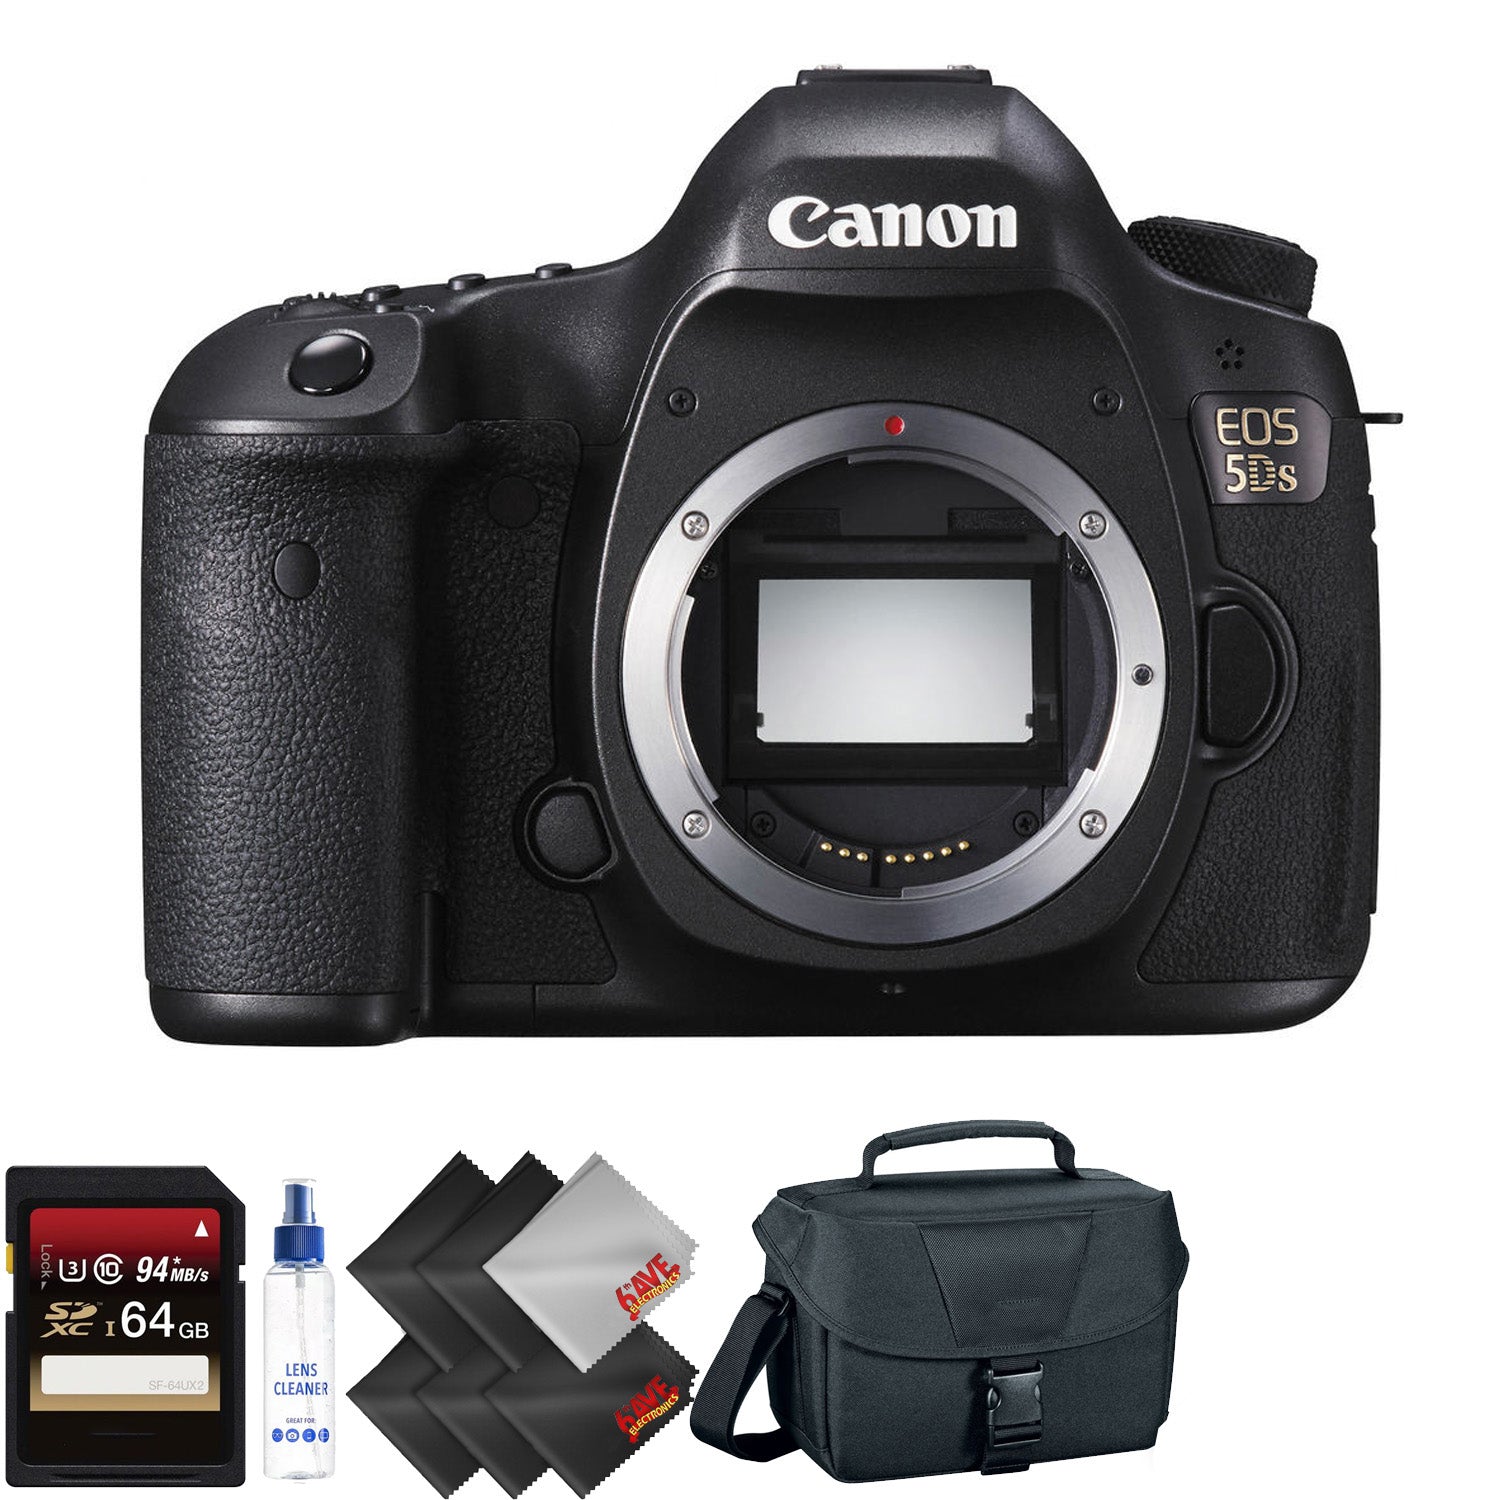 Canon EOS 5DS DSLR Camera Body Only + 64GB Memory Card Bundle068